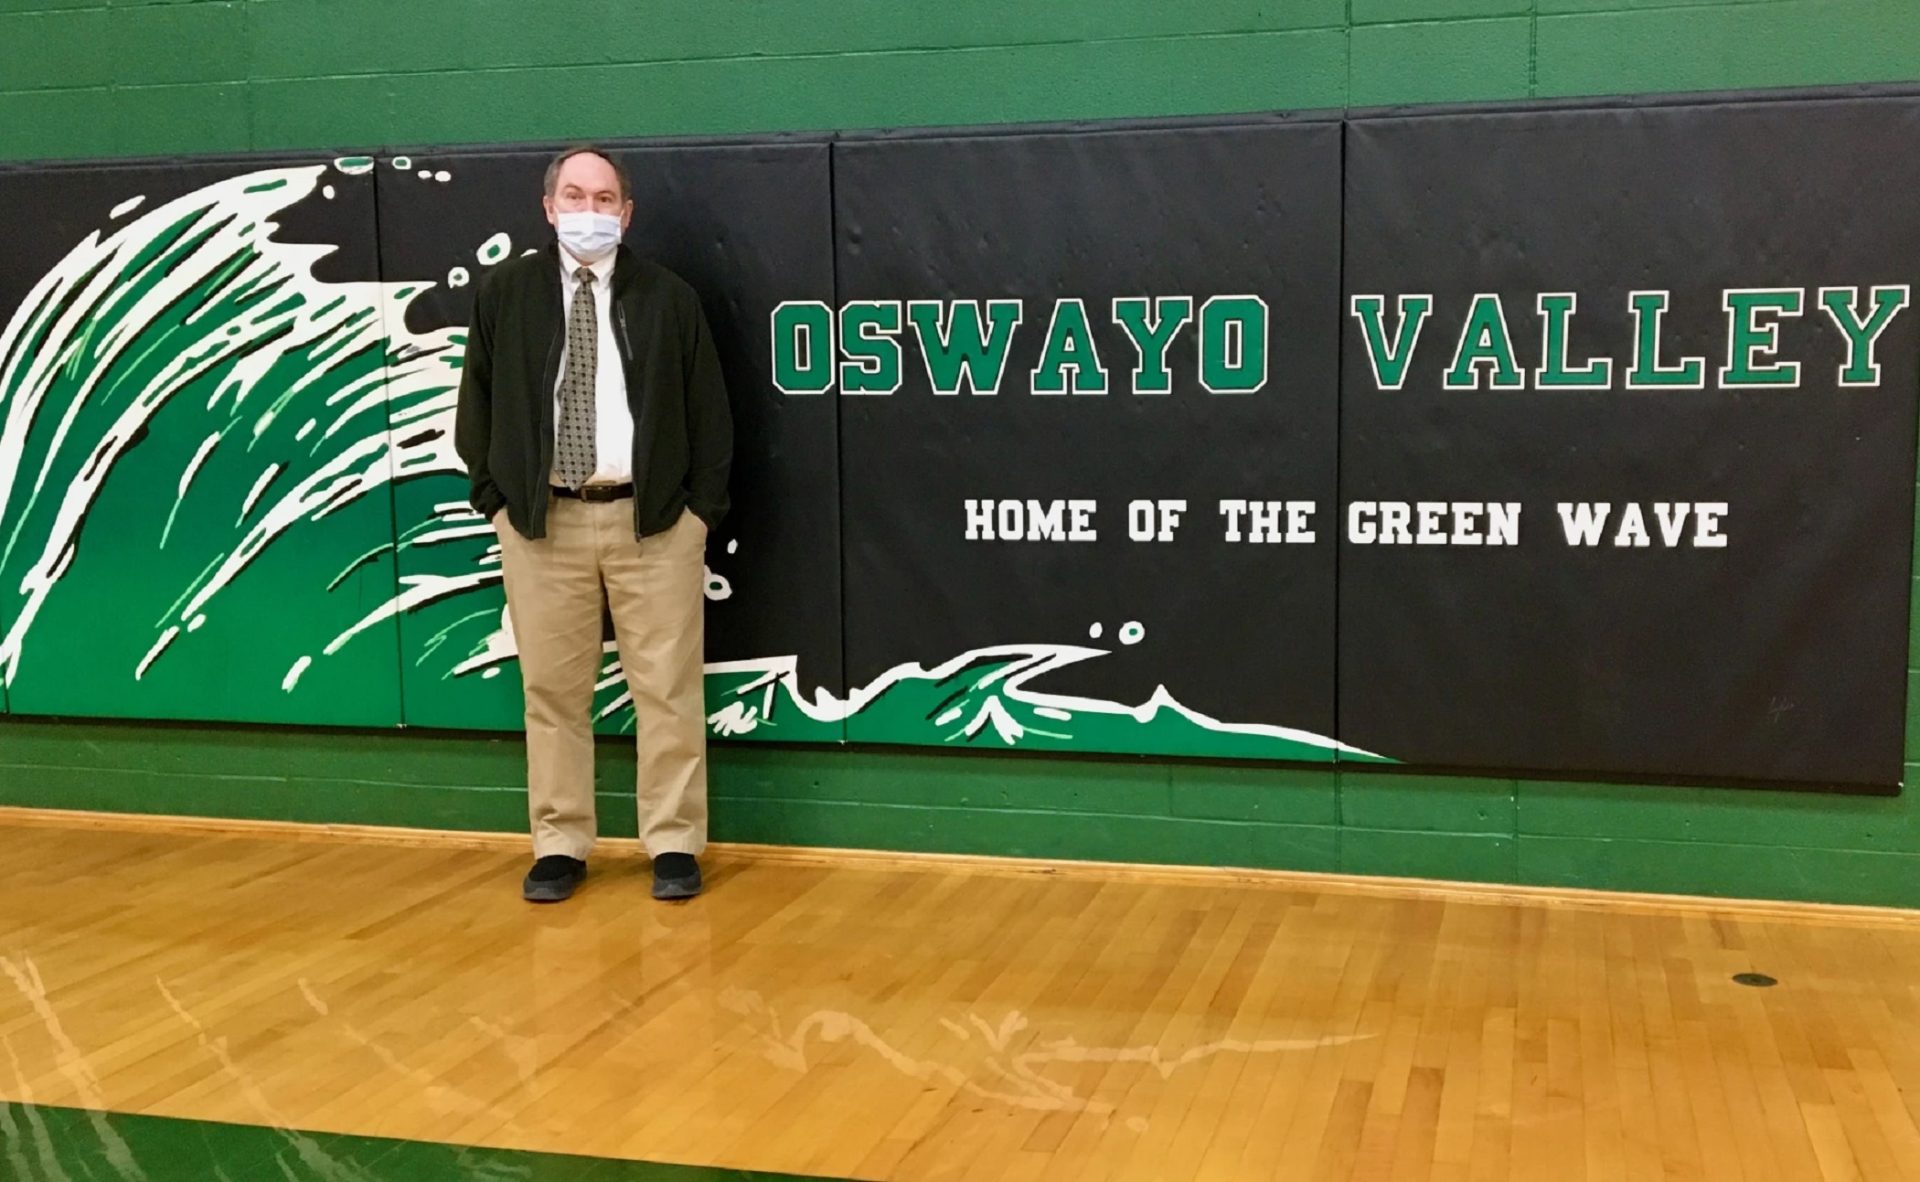 Mark Schlosser, principal of the Oswayo Valley Middle/High School, has had to fill in for teachers during the COVID-19 pandemic. Like many school districts, Oswayo Valley has a limited number of substitute teachers.